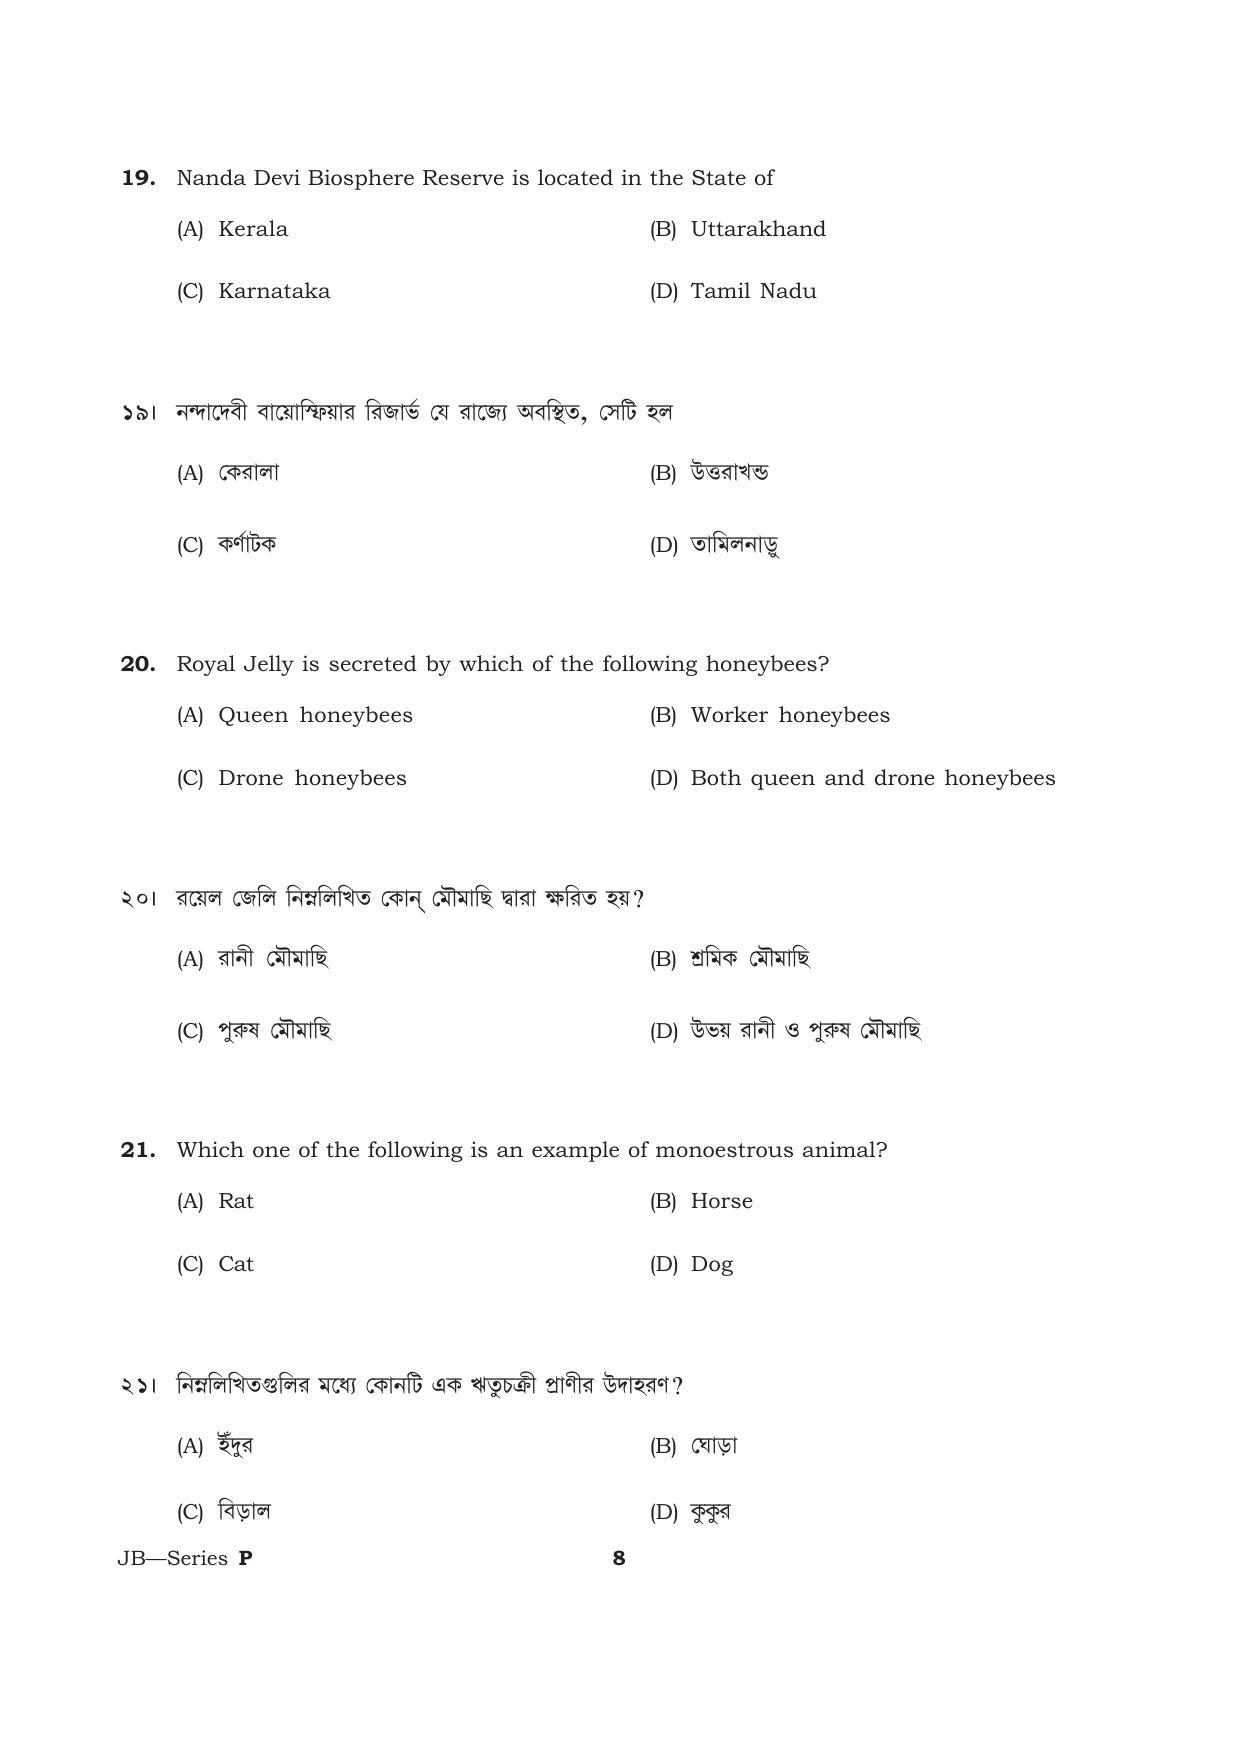 TBJEE Question Paper 2021 - Biology - Page 8